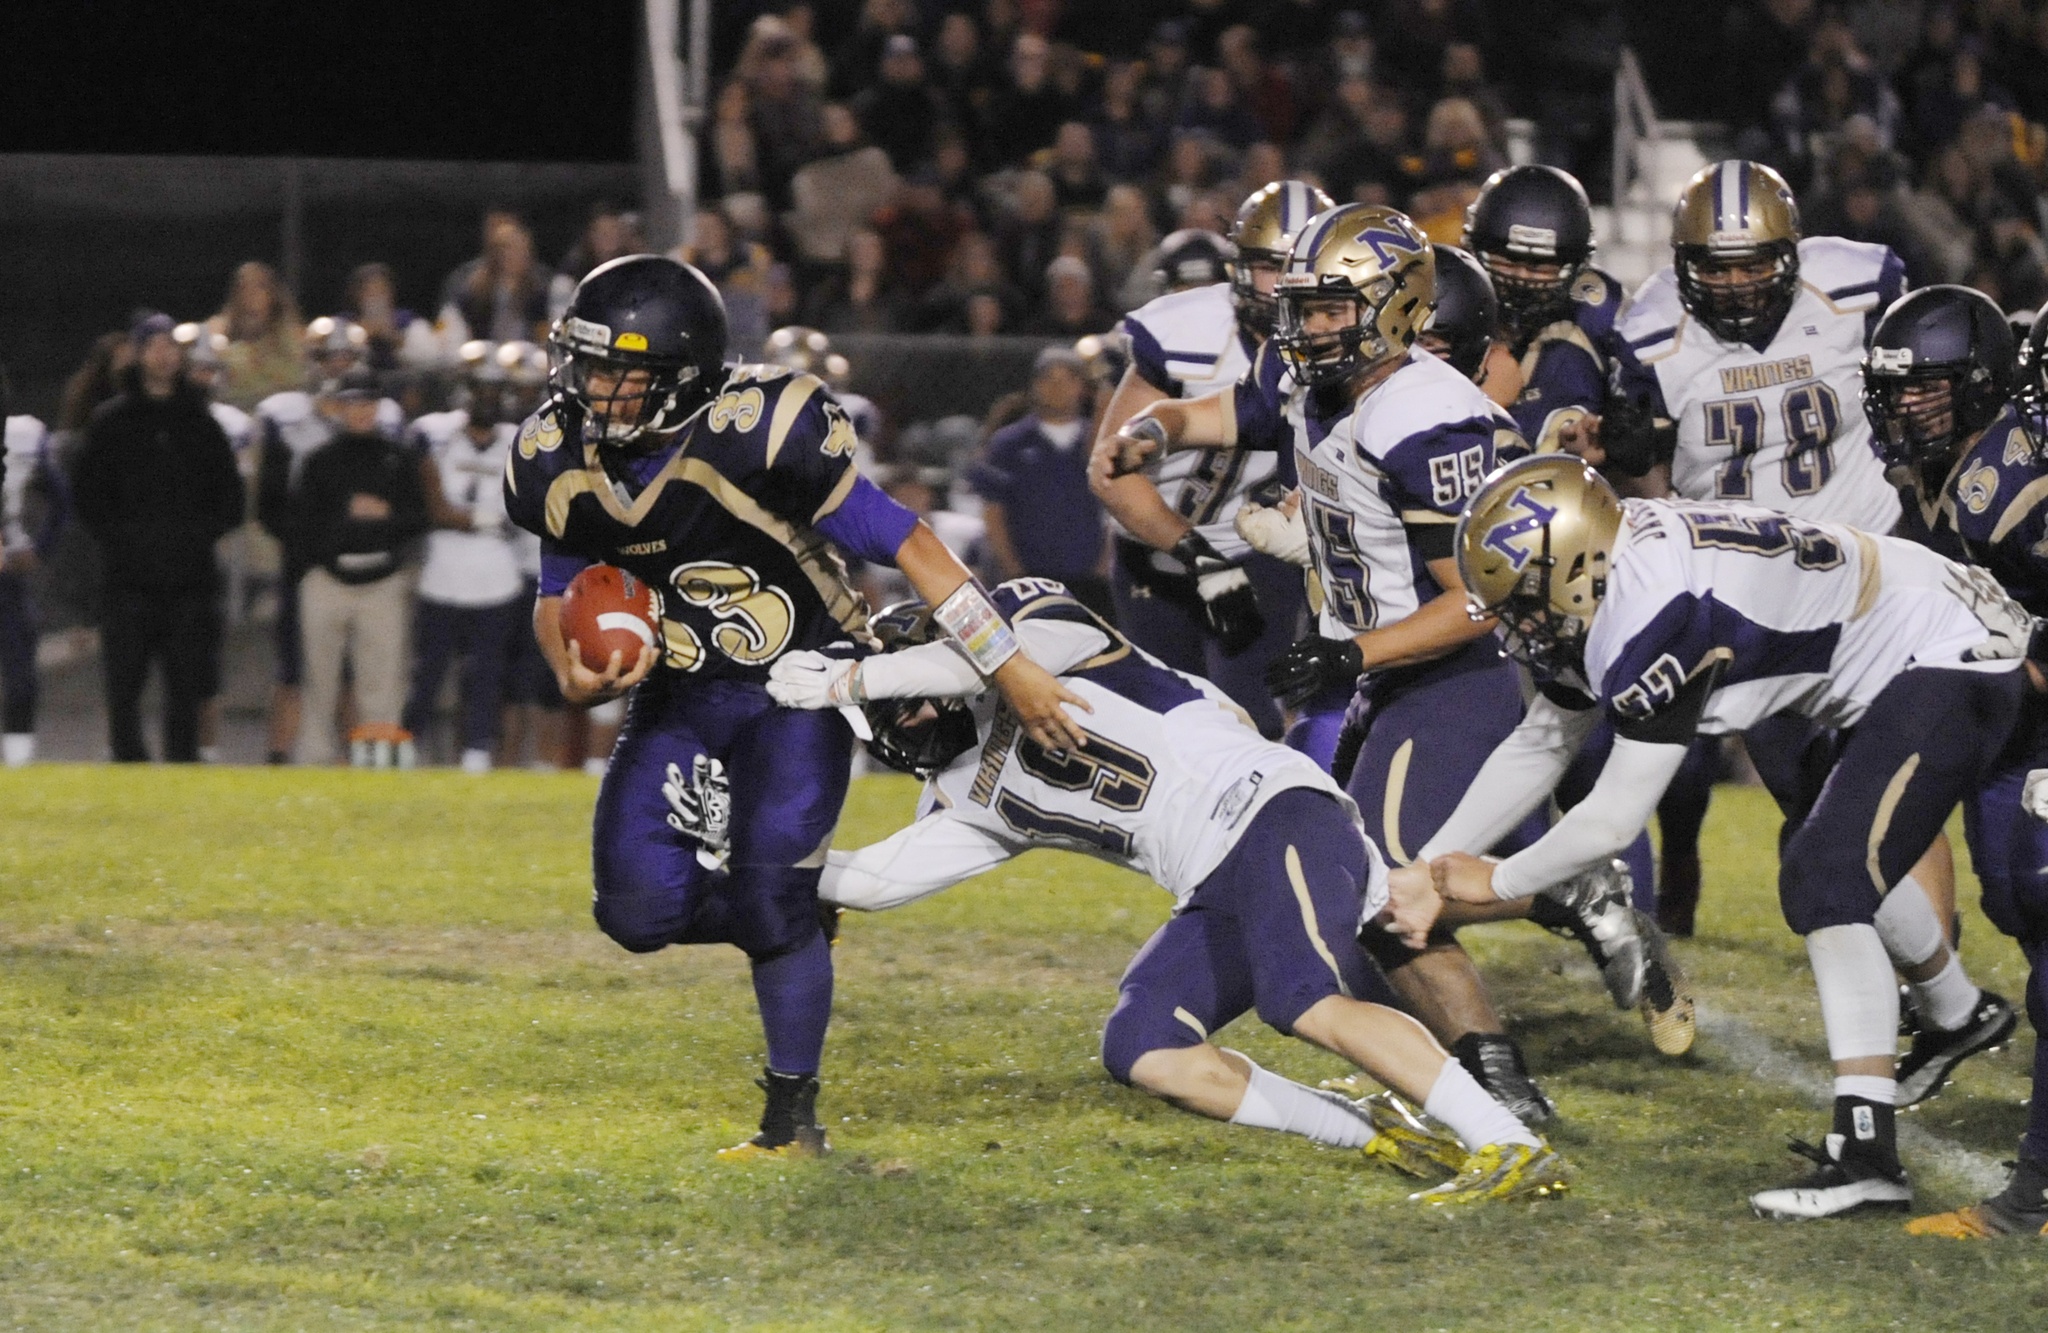 Sequim's Rudy Whitehead breaks free from Viking Zach Clark for a big gain in the second half of Sequim's 42-7 loss to North Kitsap on Sept. 30. Sequim Gazette photo by Michael Dashiell